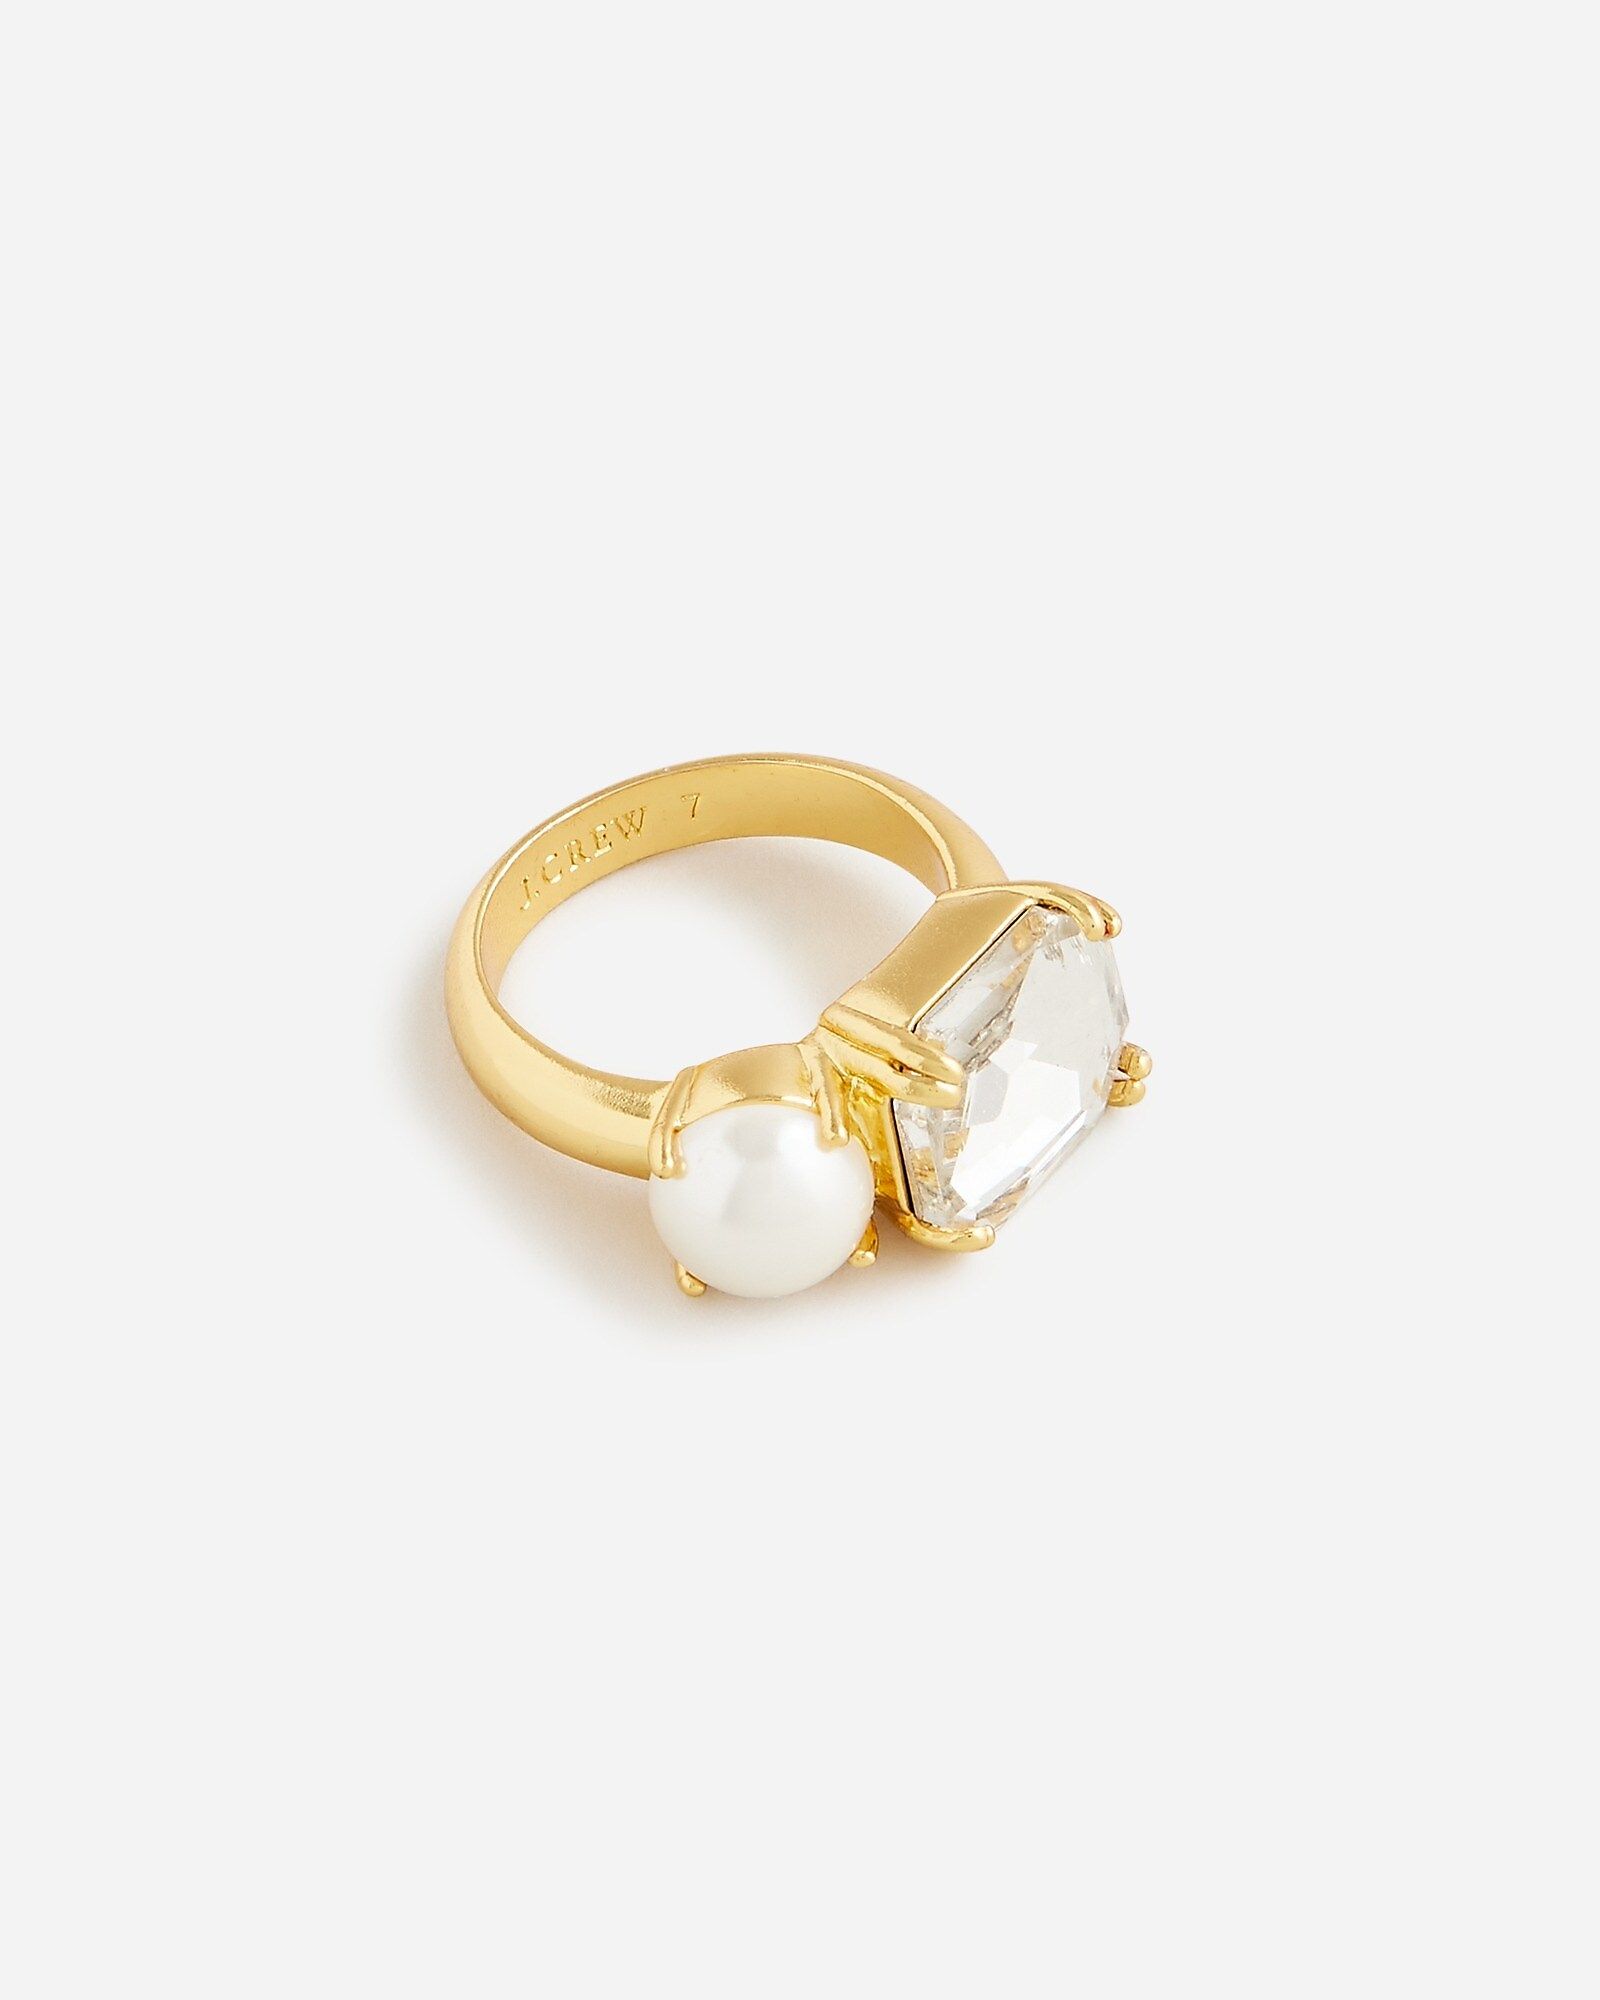 Pearl-and-crystal cocktail ring | J.Crew US